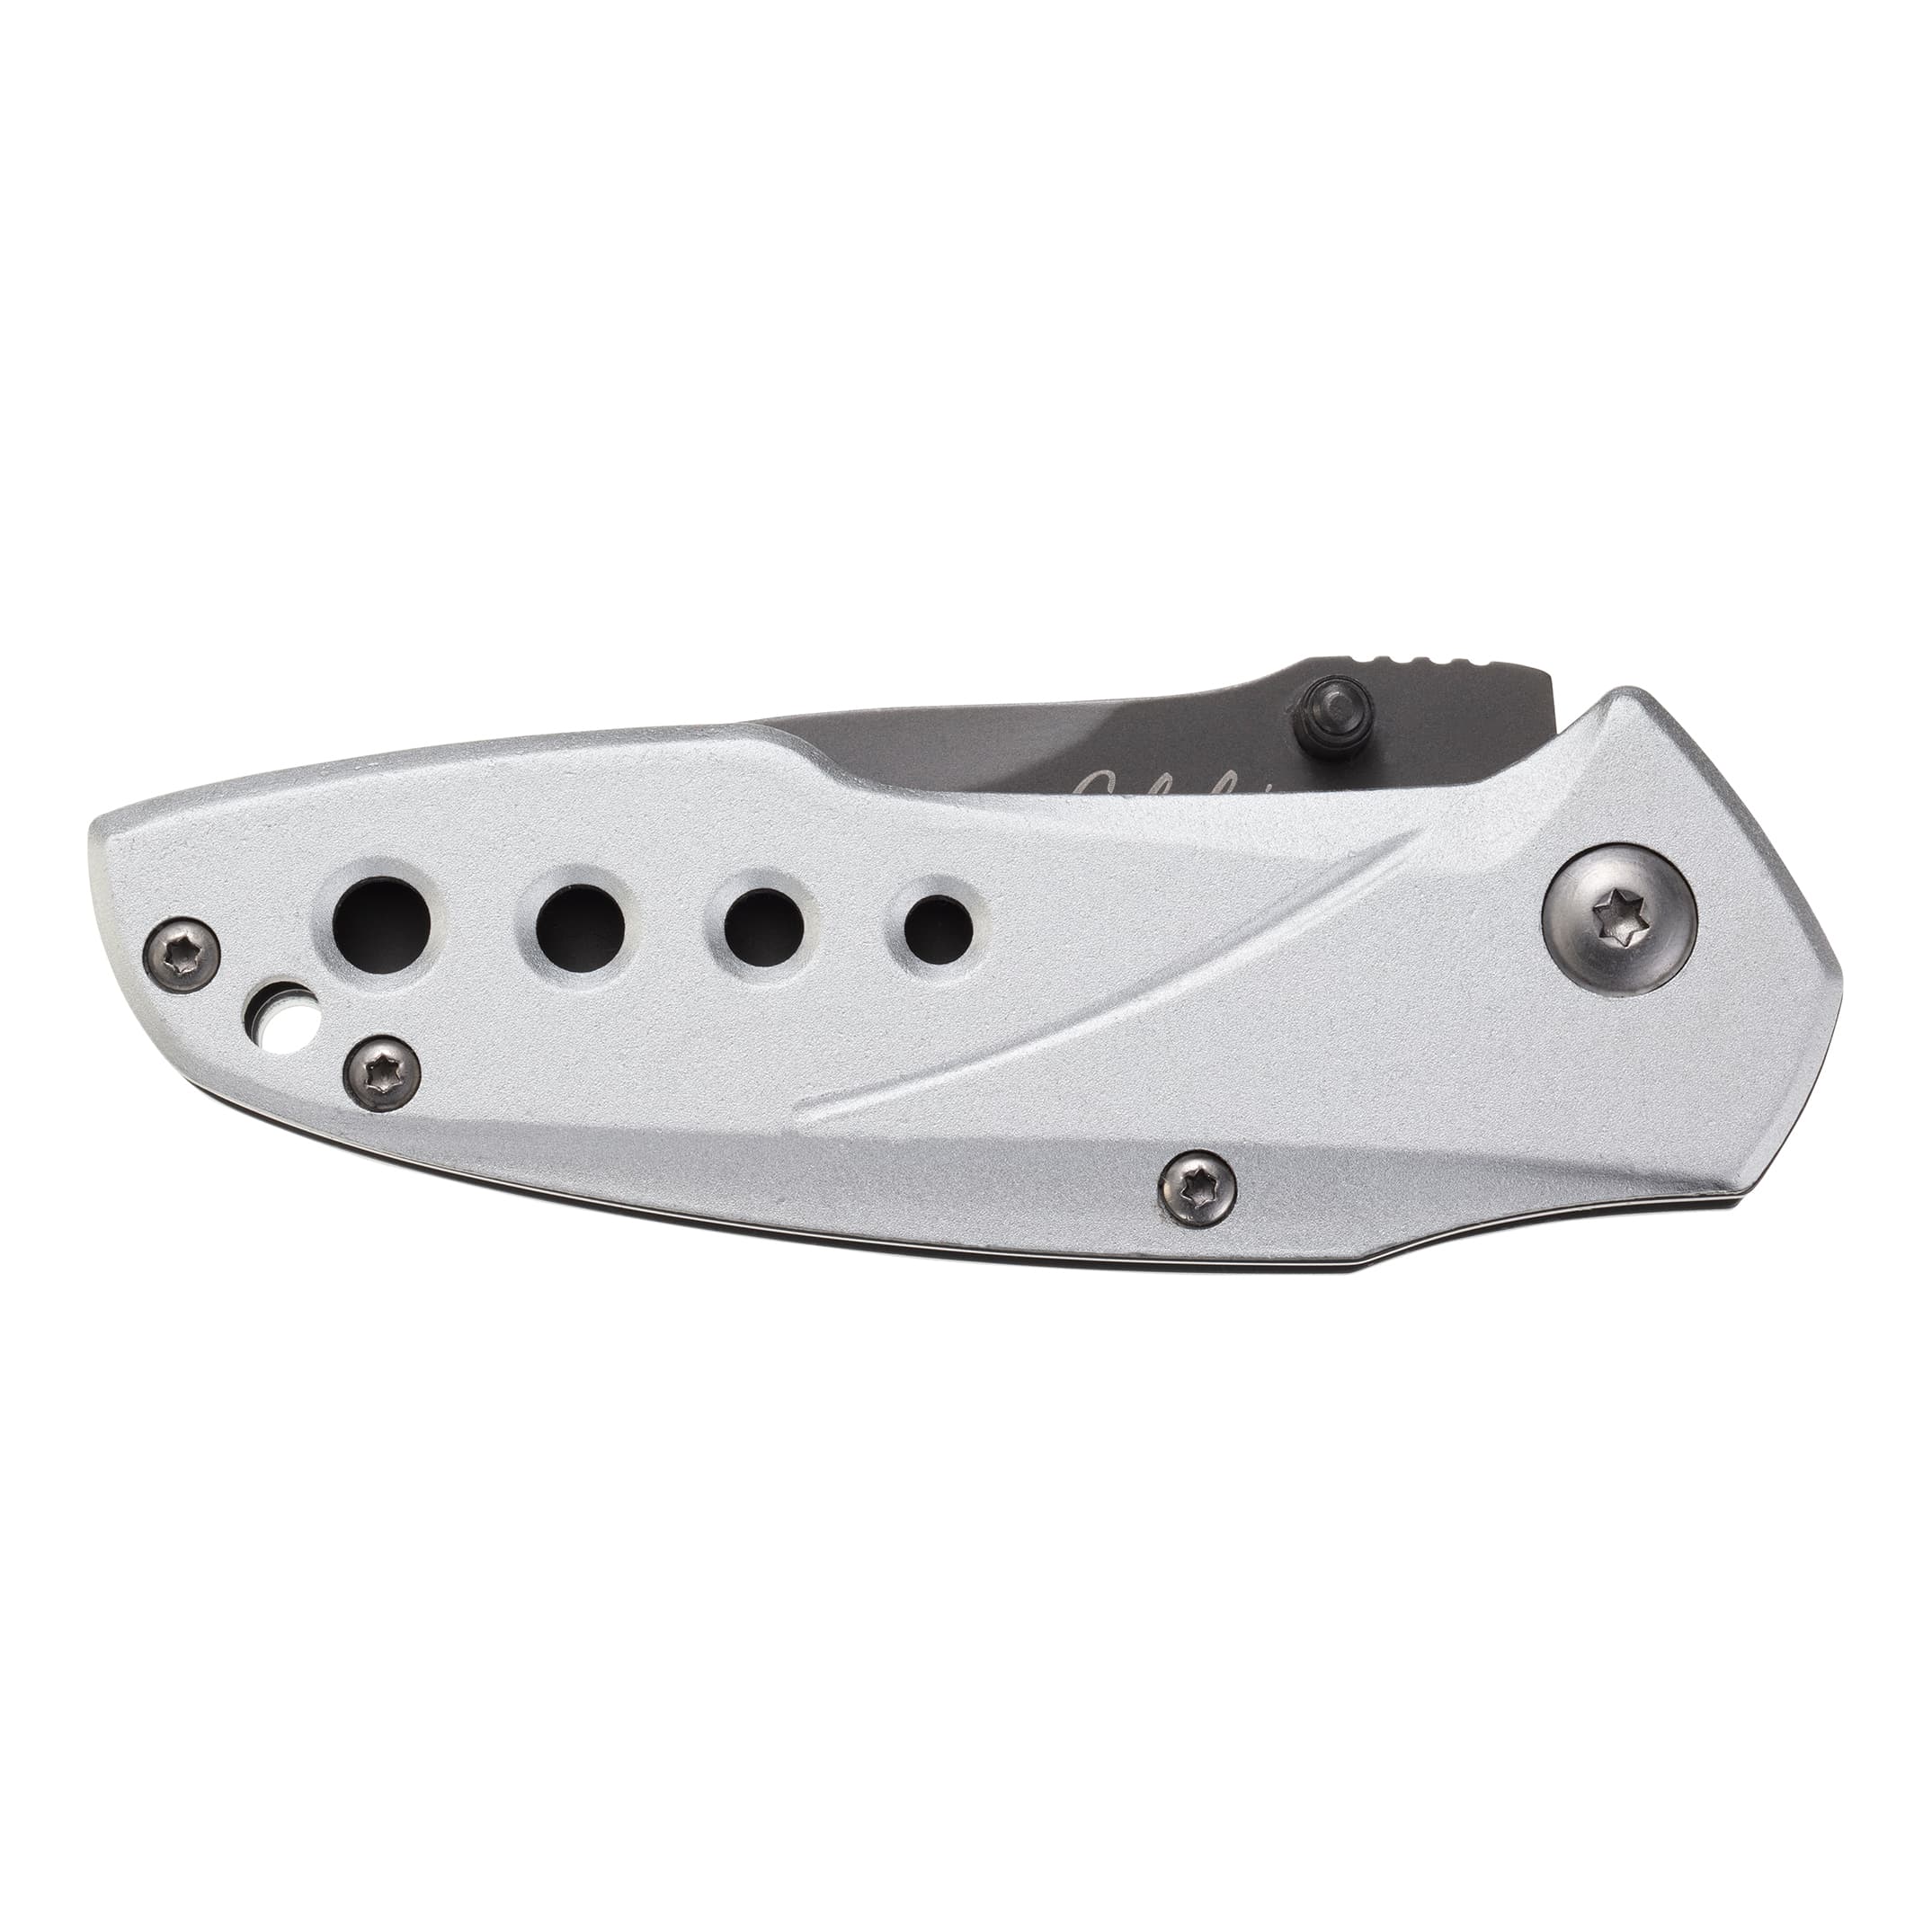 Cabela's Small Folding Knife - Silver - Closed View